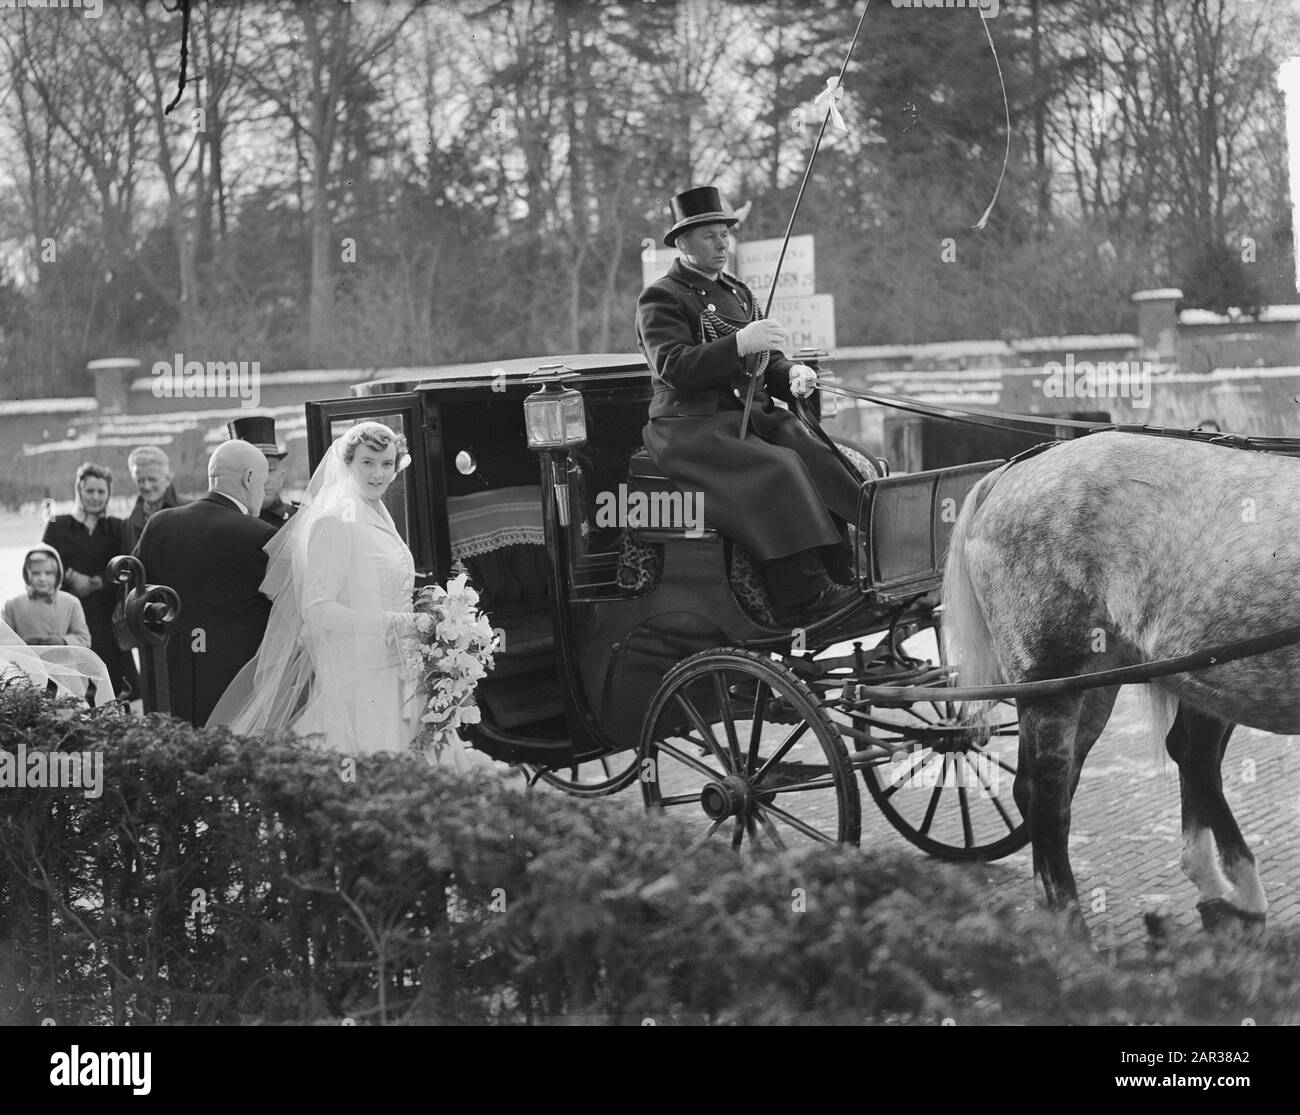 Marriage of Mr. Hans Smulders with Mary Sevenstern at Dieren. The bride in the company of her father at the carriage (Hogestraat in Dieren) Annotation: J.P.M.A. Smulders (1912-) was a member of the management Anefo. Mary Sevenstern was a daughter of the owner of the distillery Sevenstern at Dieren Date: 4 January 1951 Location: Animal Keywords: brides, marriages, carriages Personal name: Sevenstern, M. Stock Photo